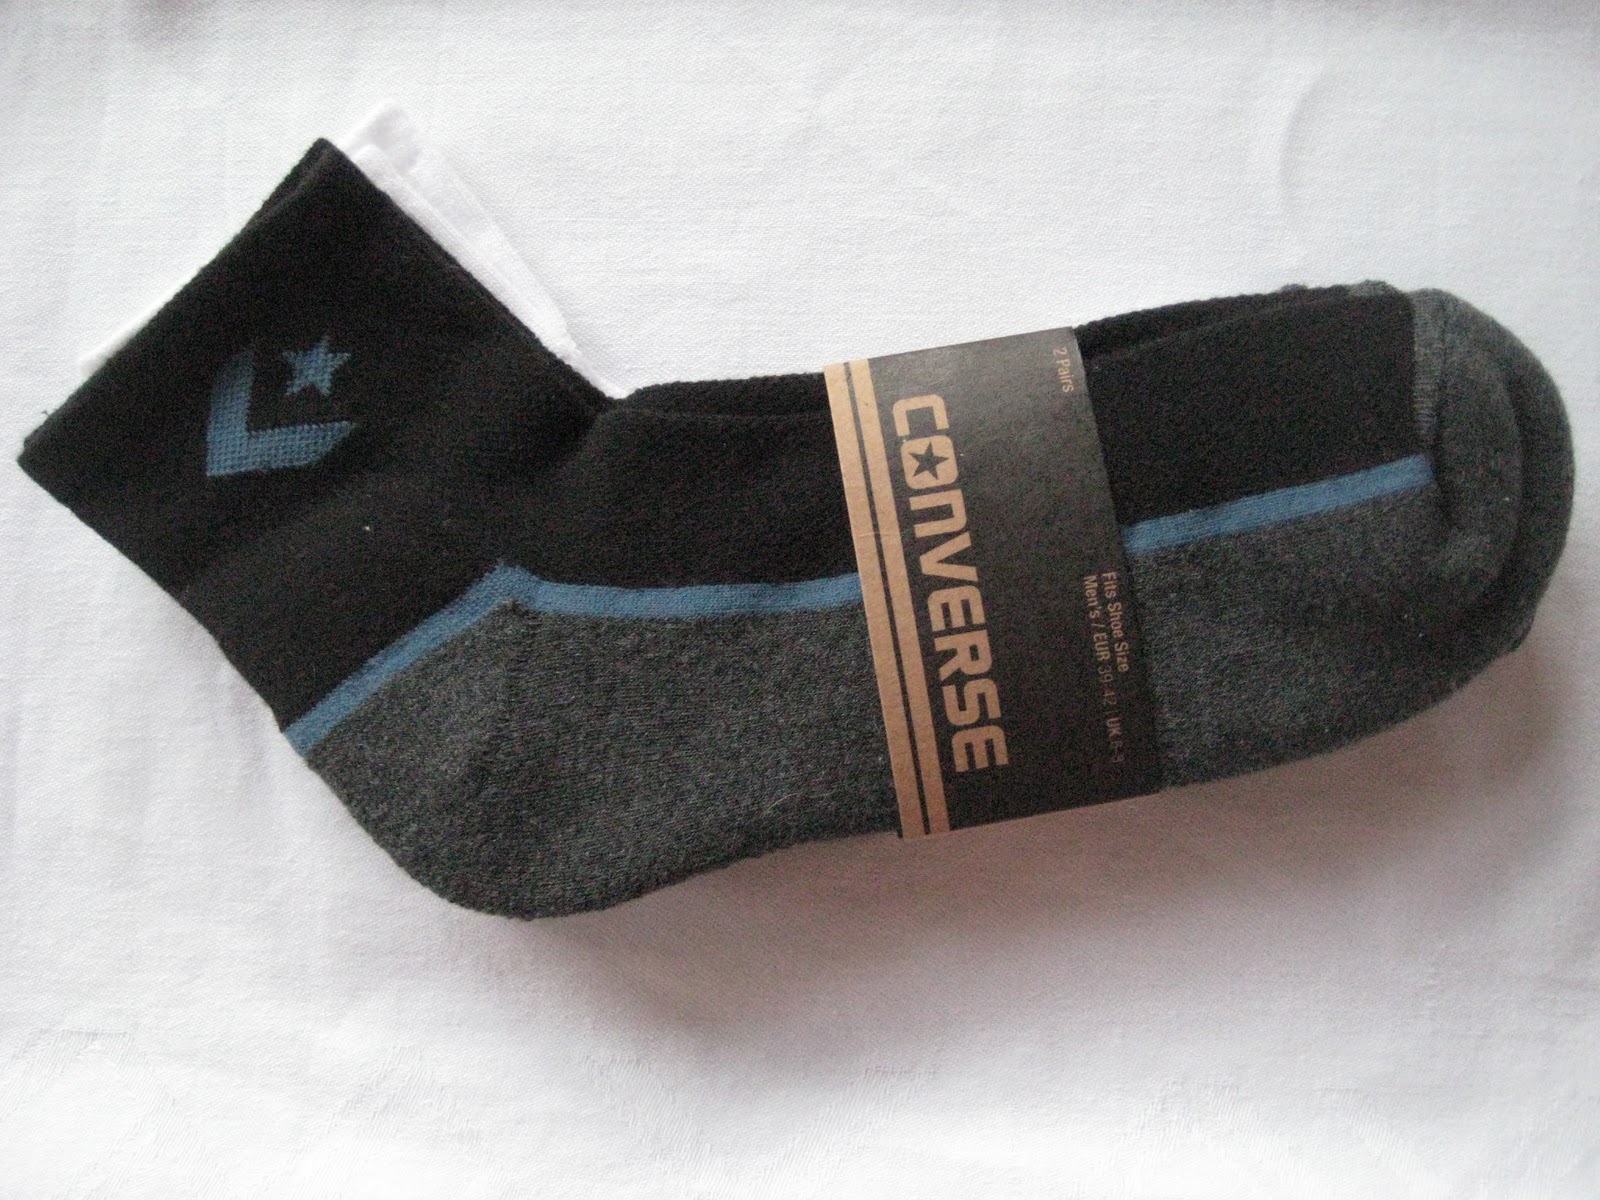 sneakers & socks: CONVERSE black ankle socks with grey sole and toebox ...